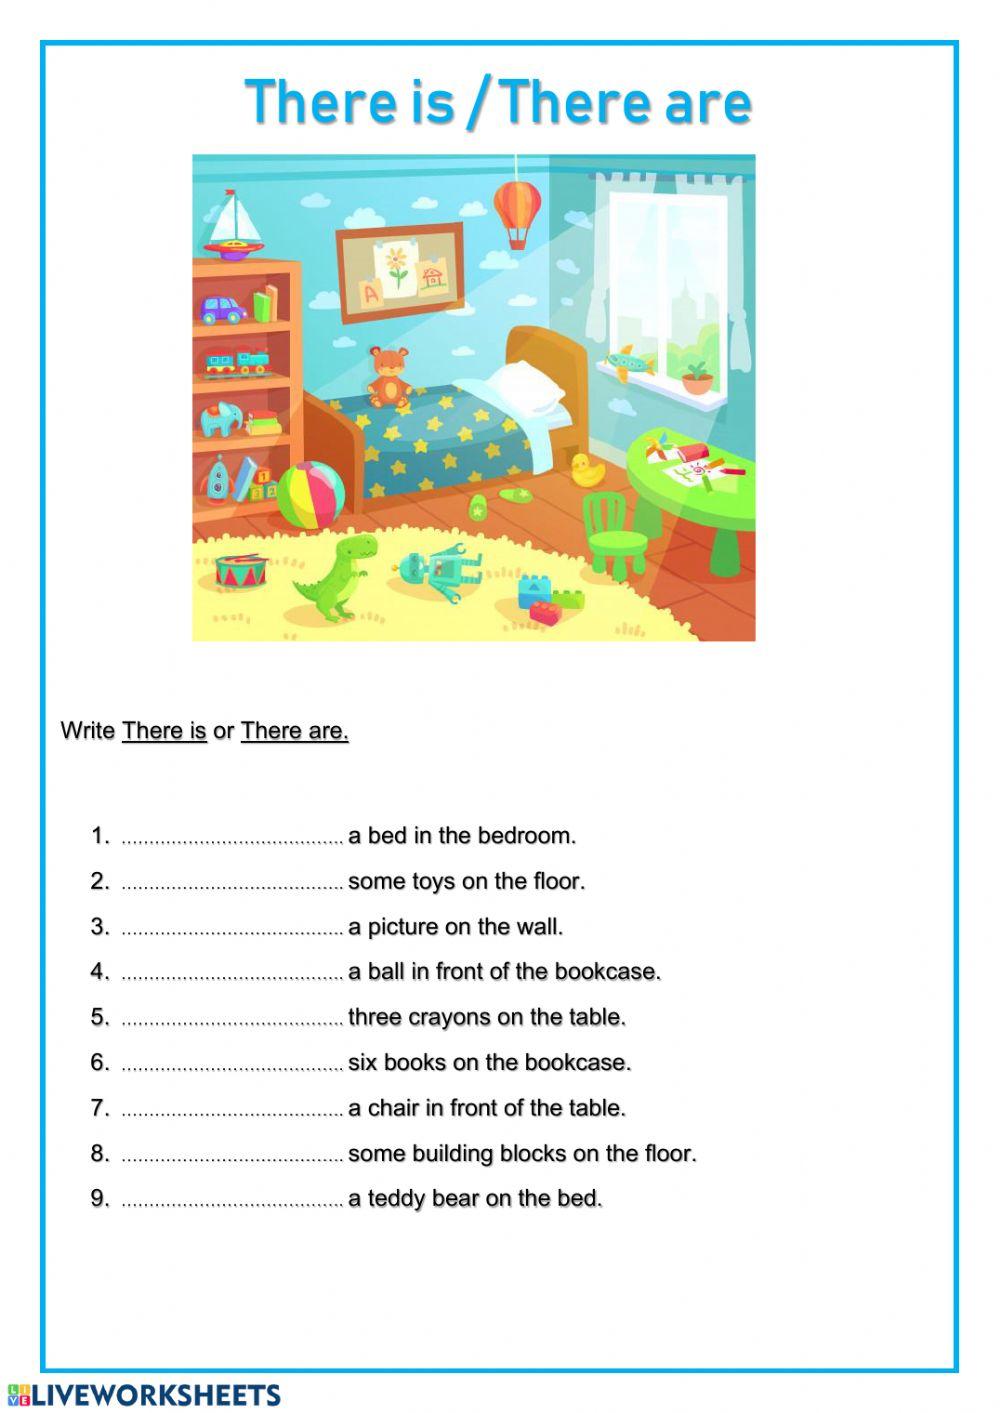 There is - There are online exercise for Grade 4 | Live Worksheets